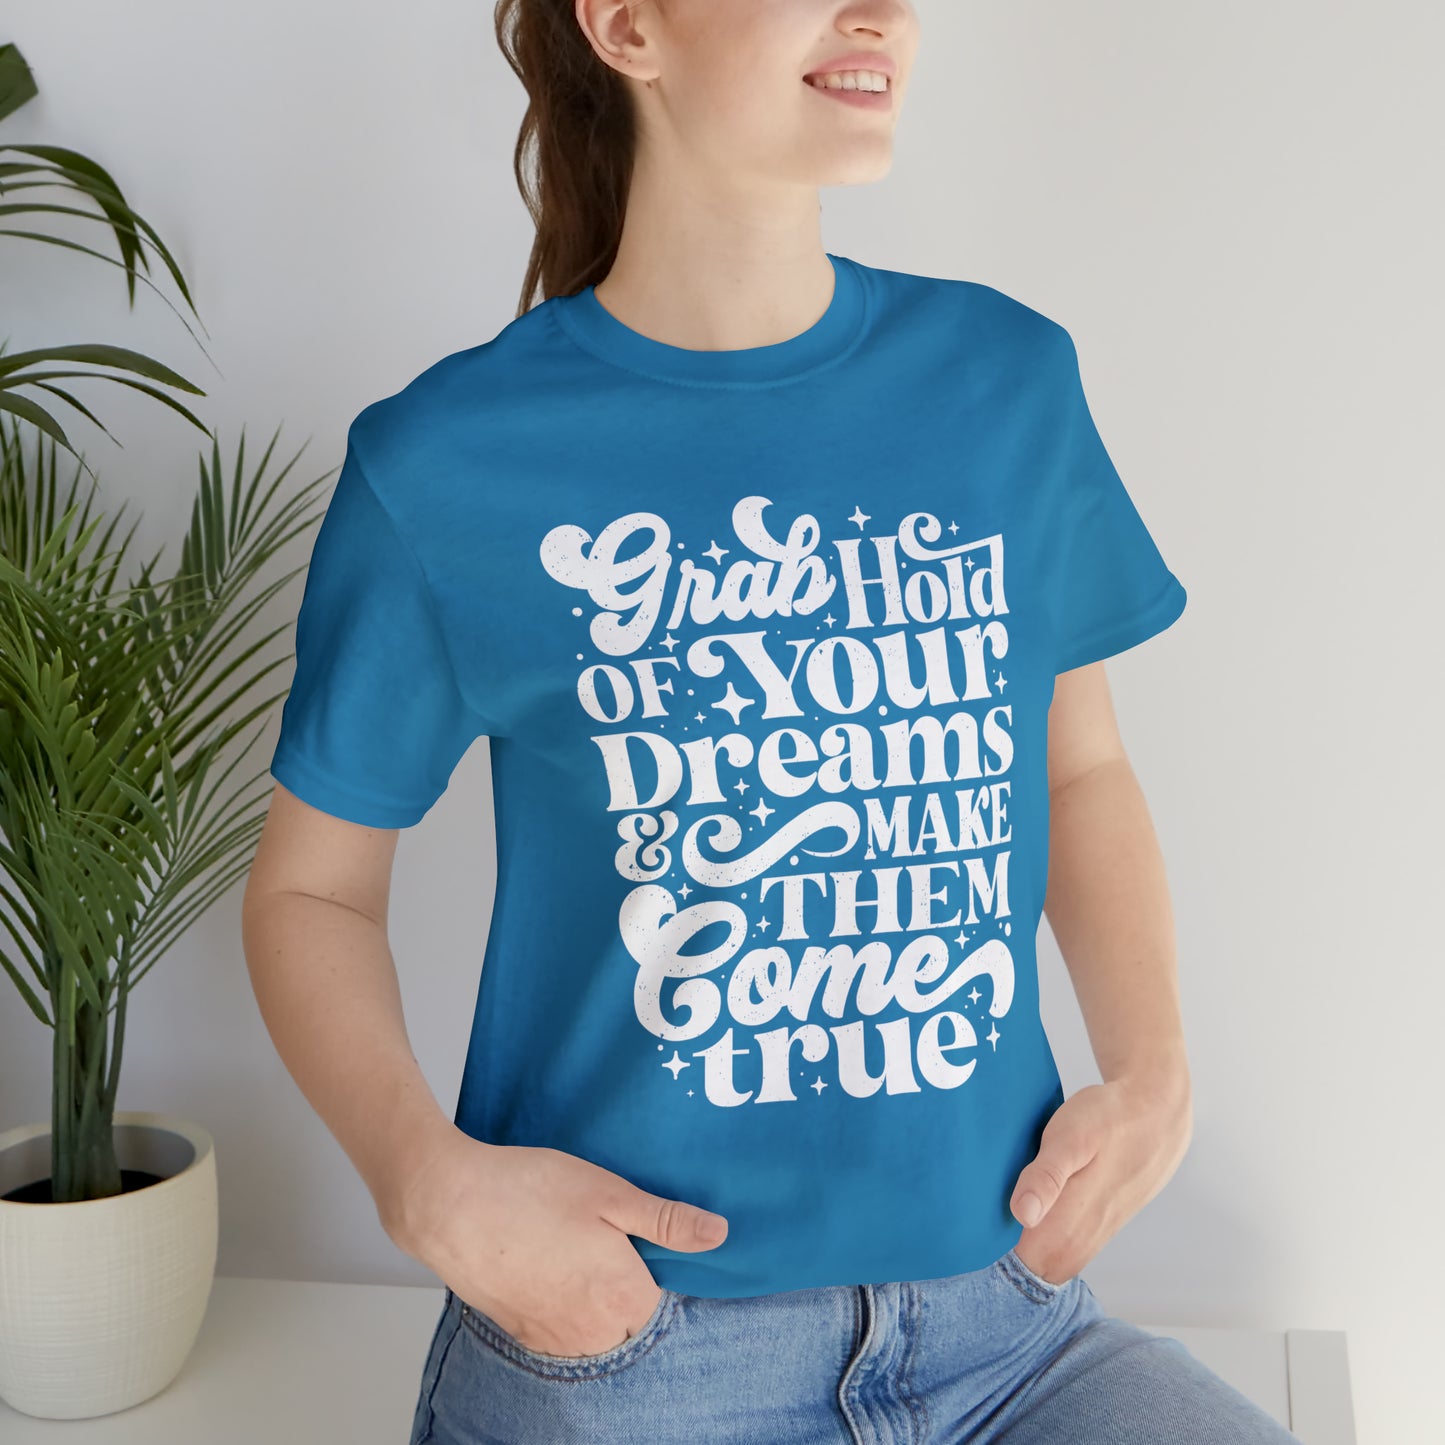 Grab Hold of Your Dreams Tee